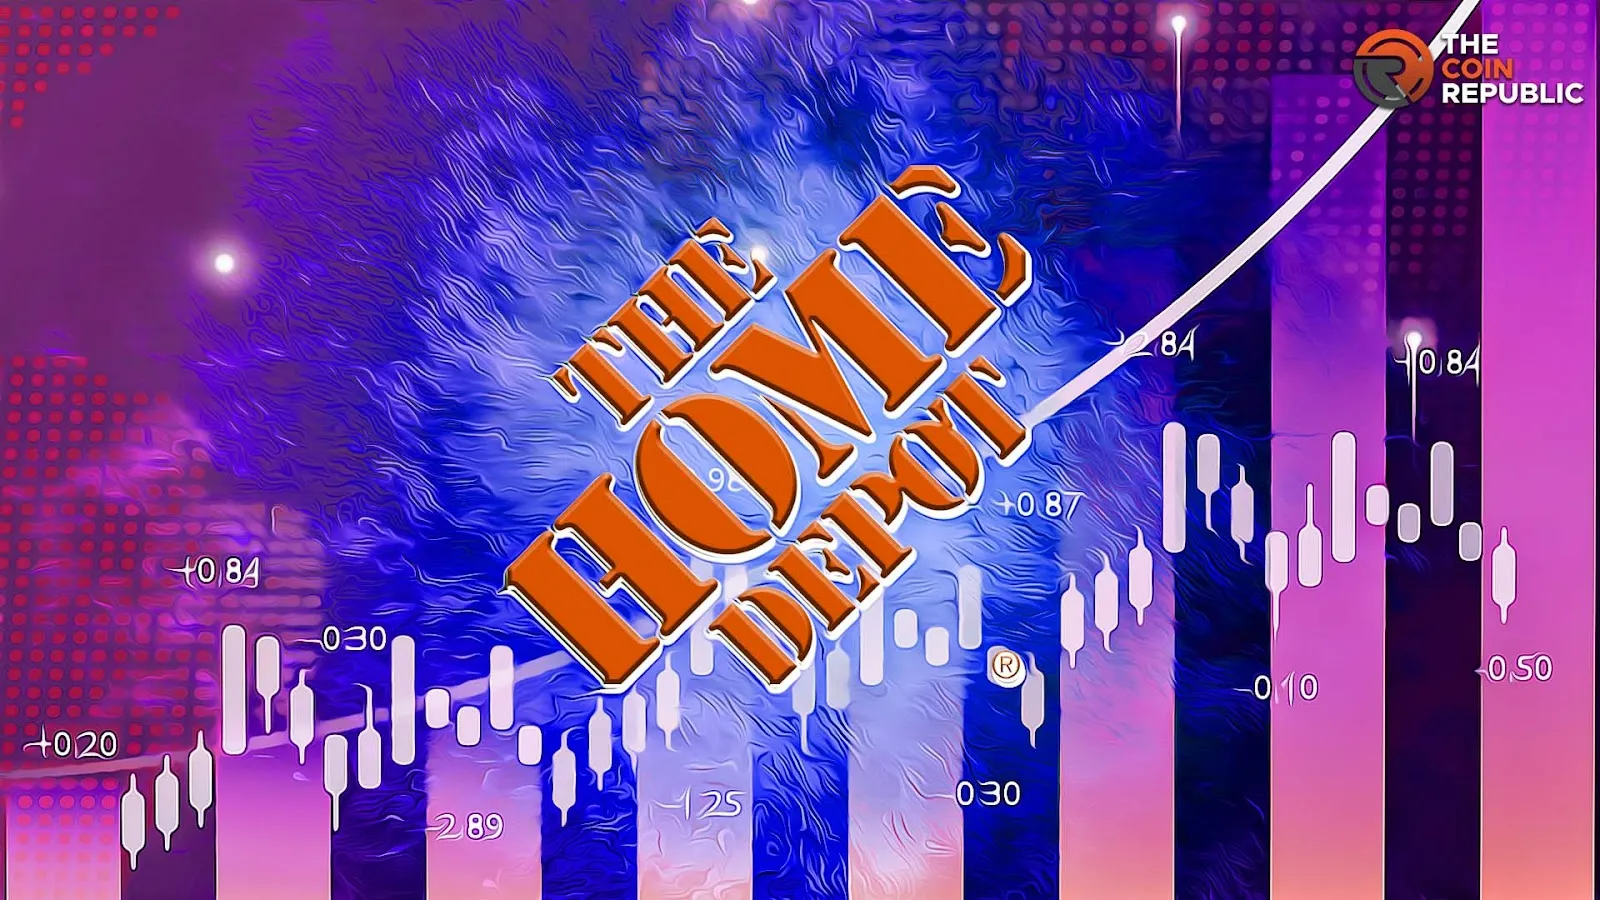 Home Depot Stock: HD Price Plunges After First Quarter Report